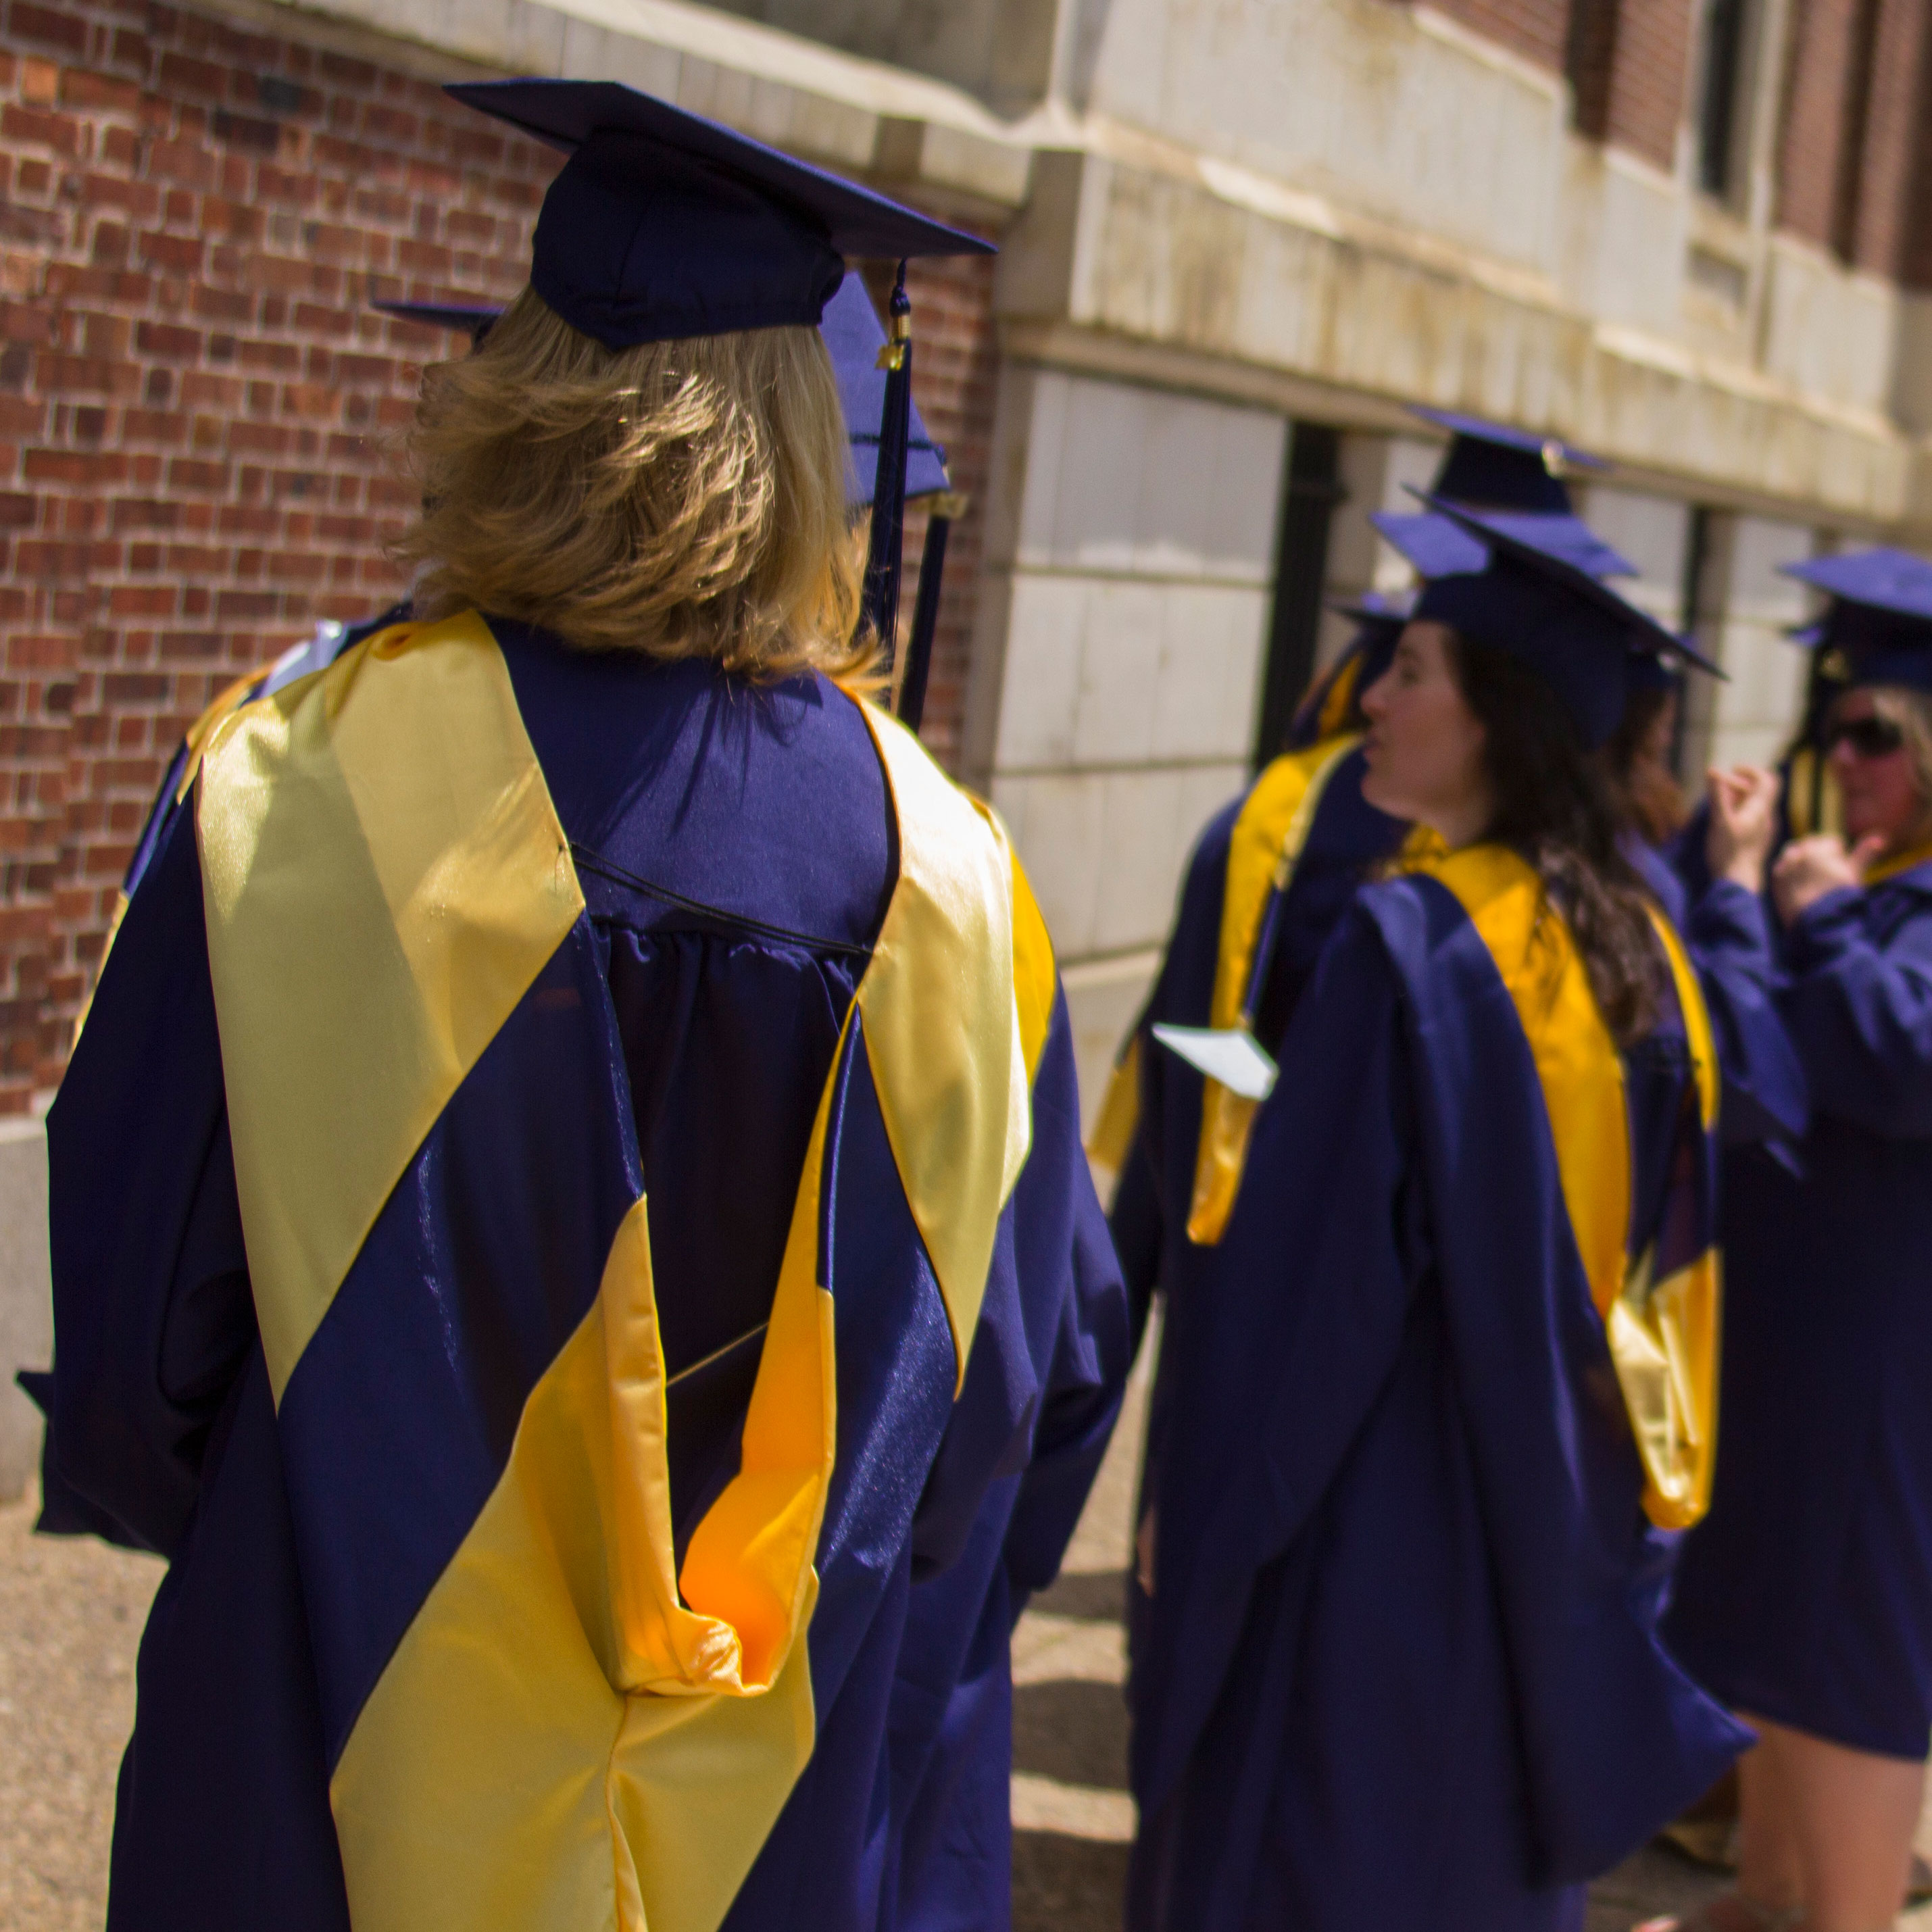 A person with blond hair wearing Drexel graduation regalia